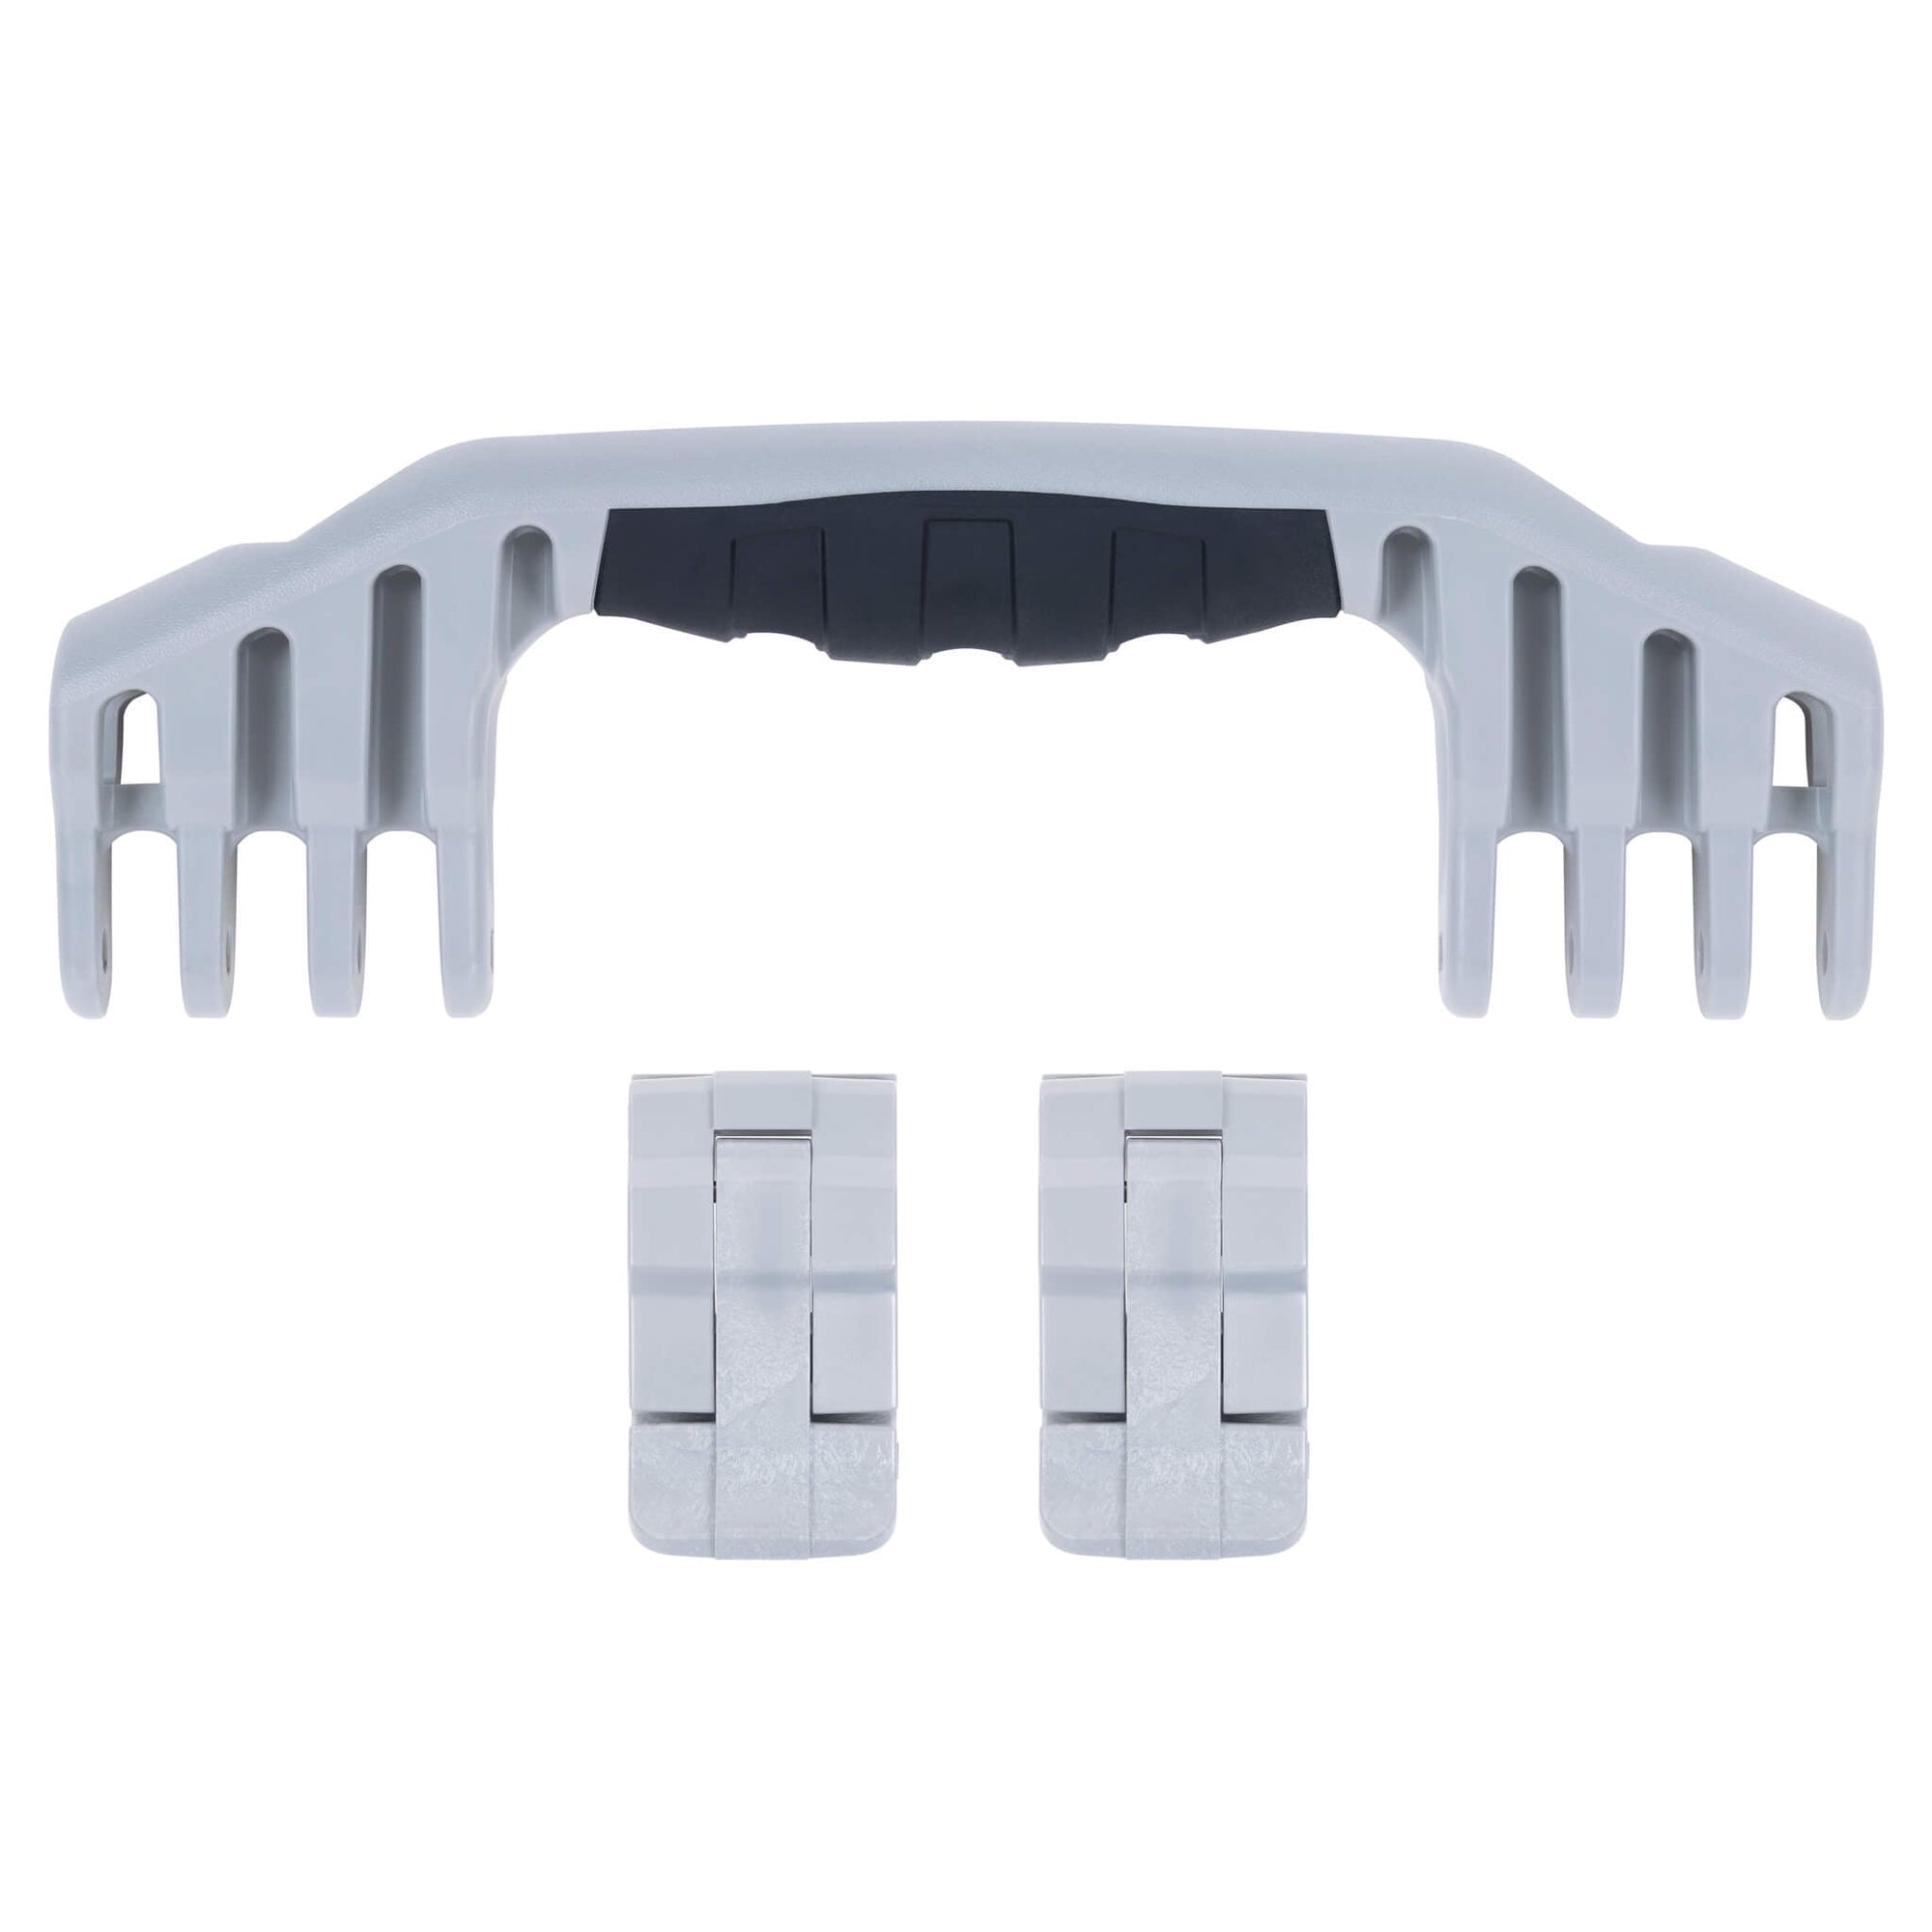 Pelican 1550 Replacement Handle & Latches, Silver (Set of 1 Handle, 2 Latches) ColorCase 